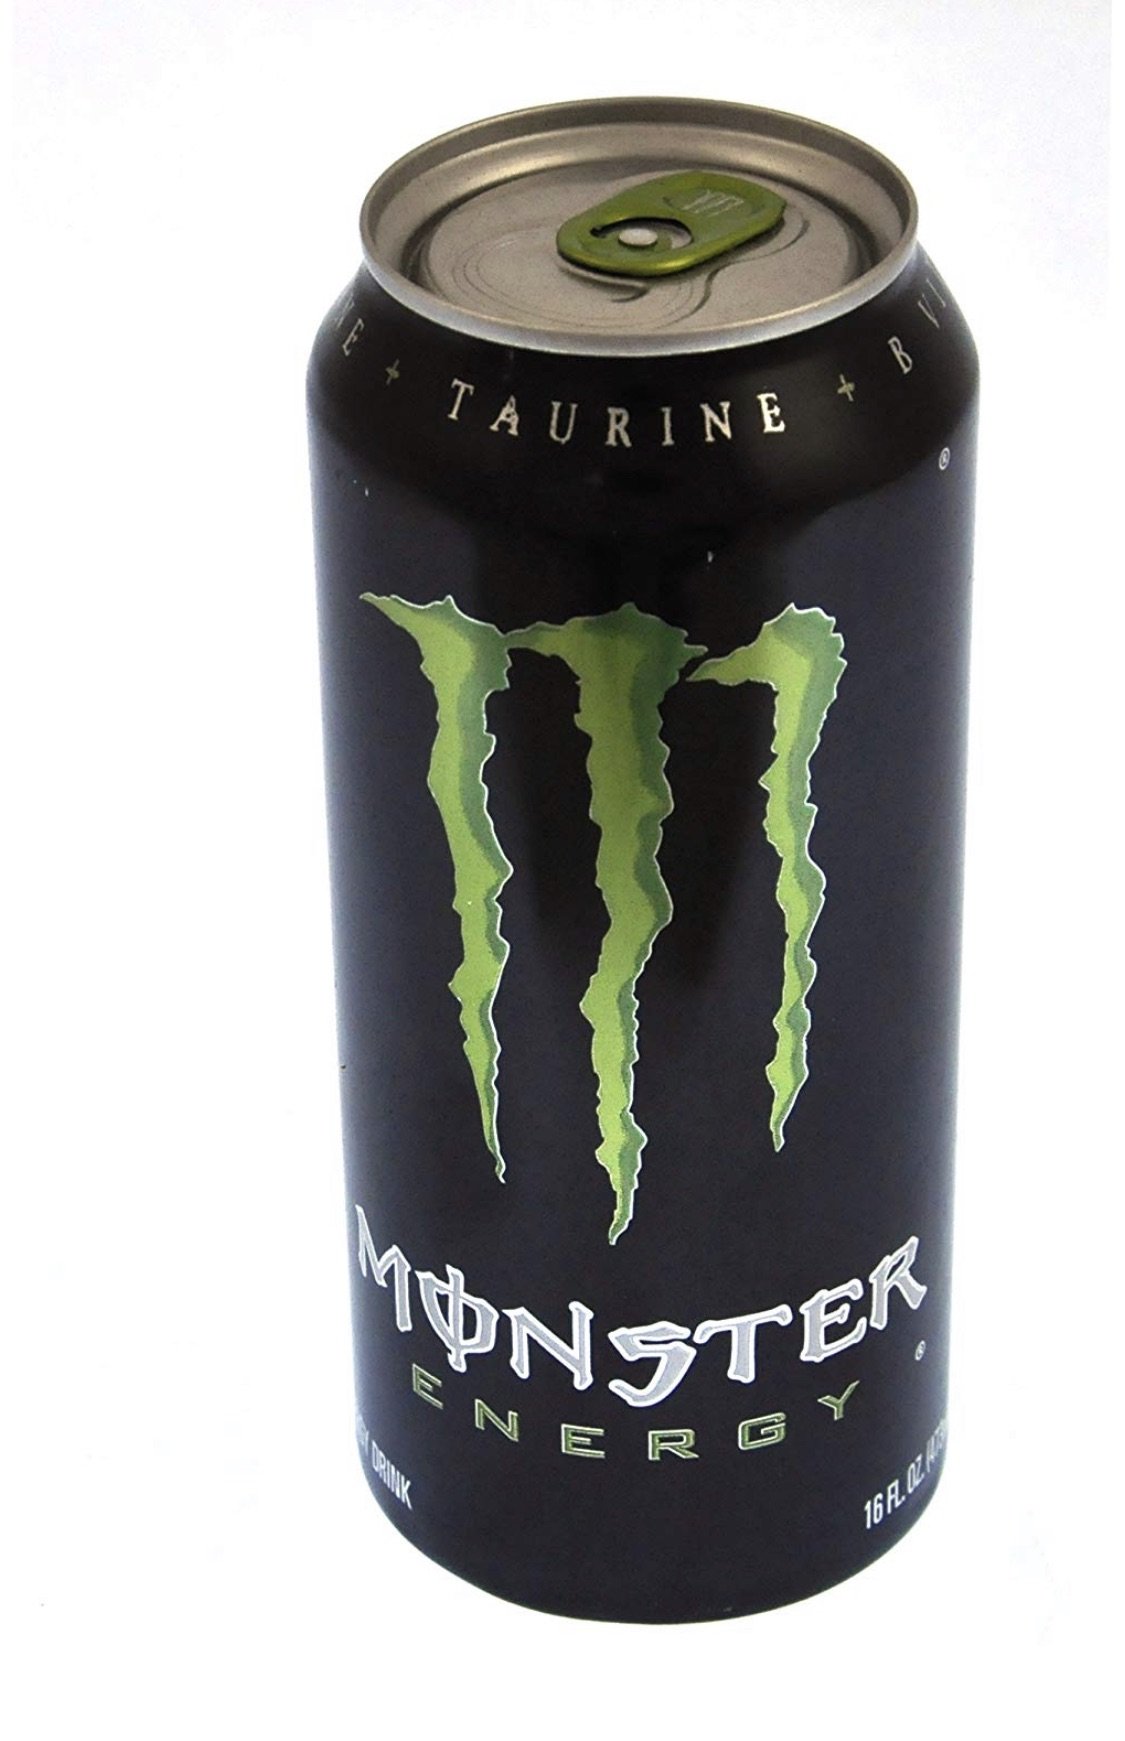 protector deposito monster energy